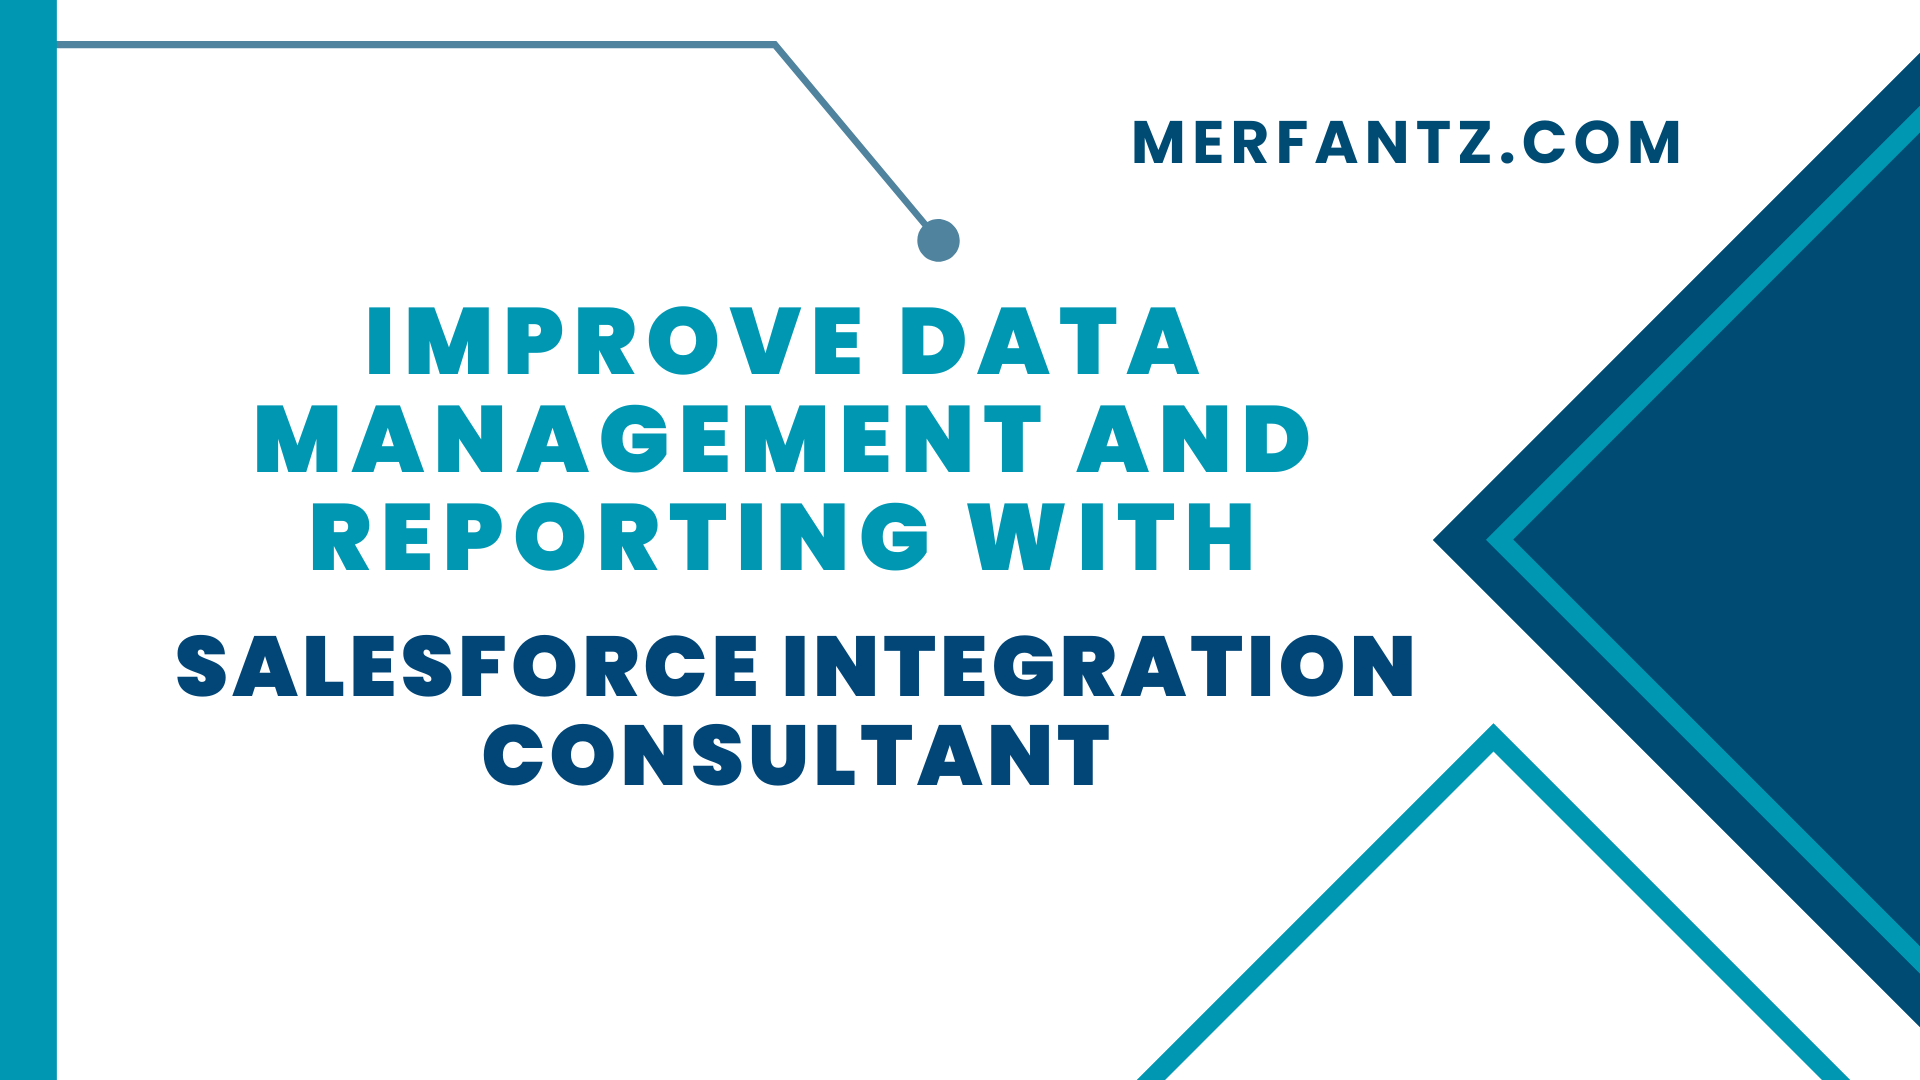 Improve Data Management and Reporting with Salesforce Integration Consultant